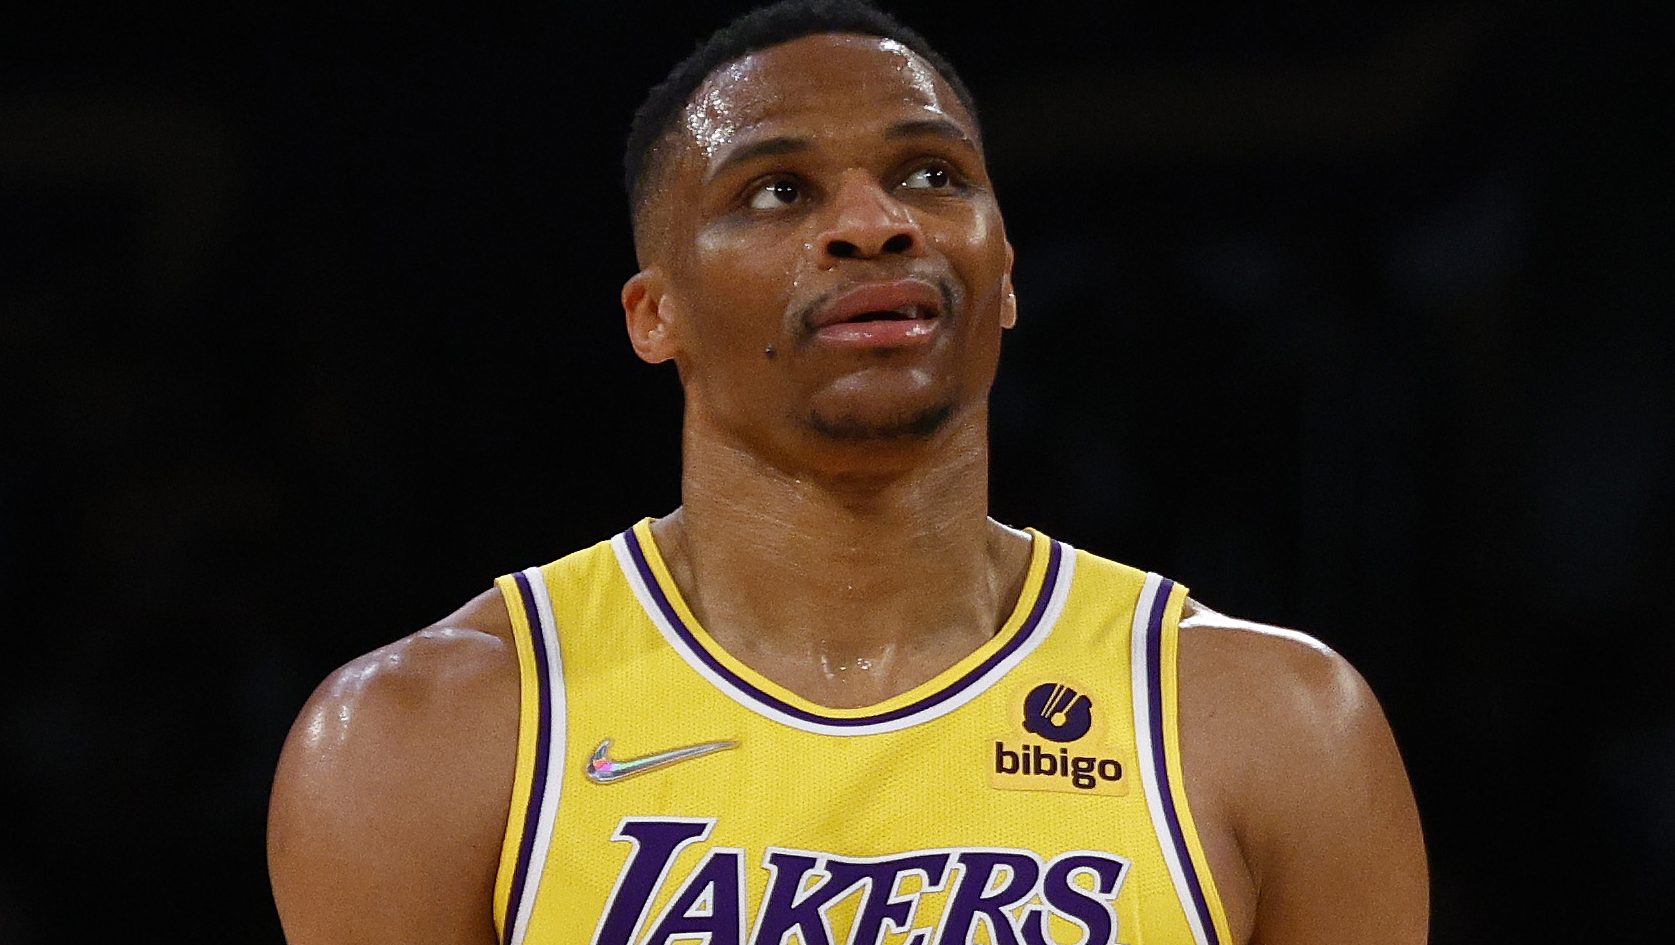 Lakers News: Russell Westbrook Featured in Starting Lineup Early